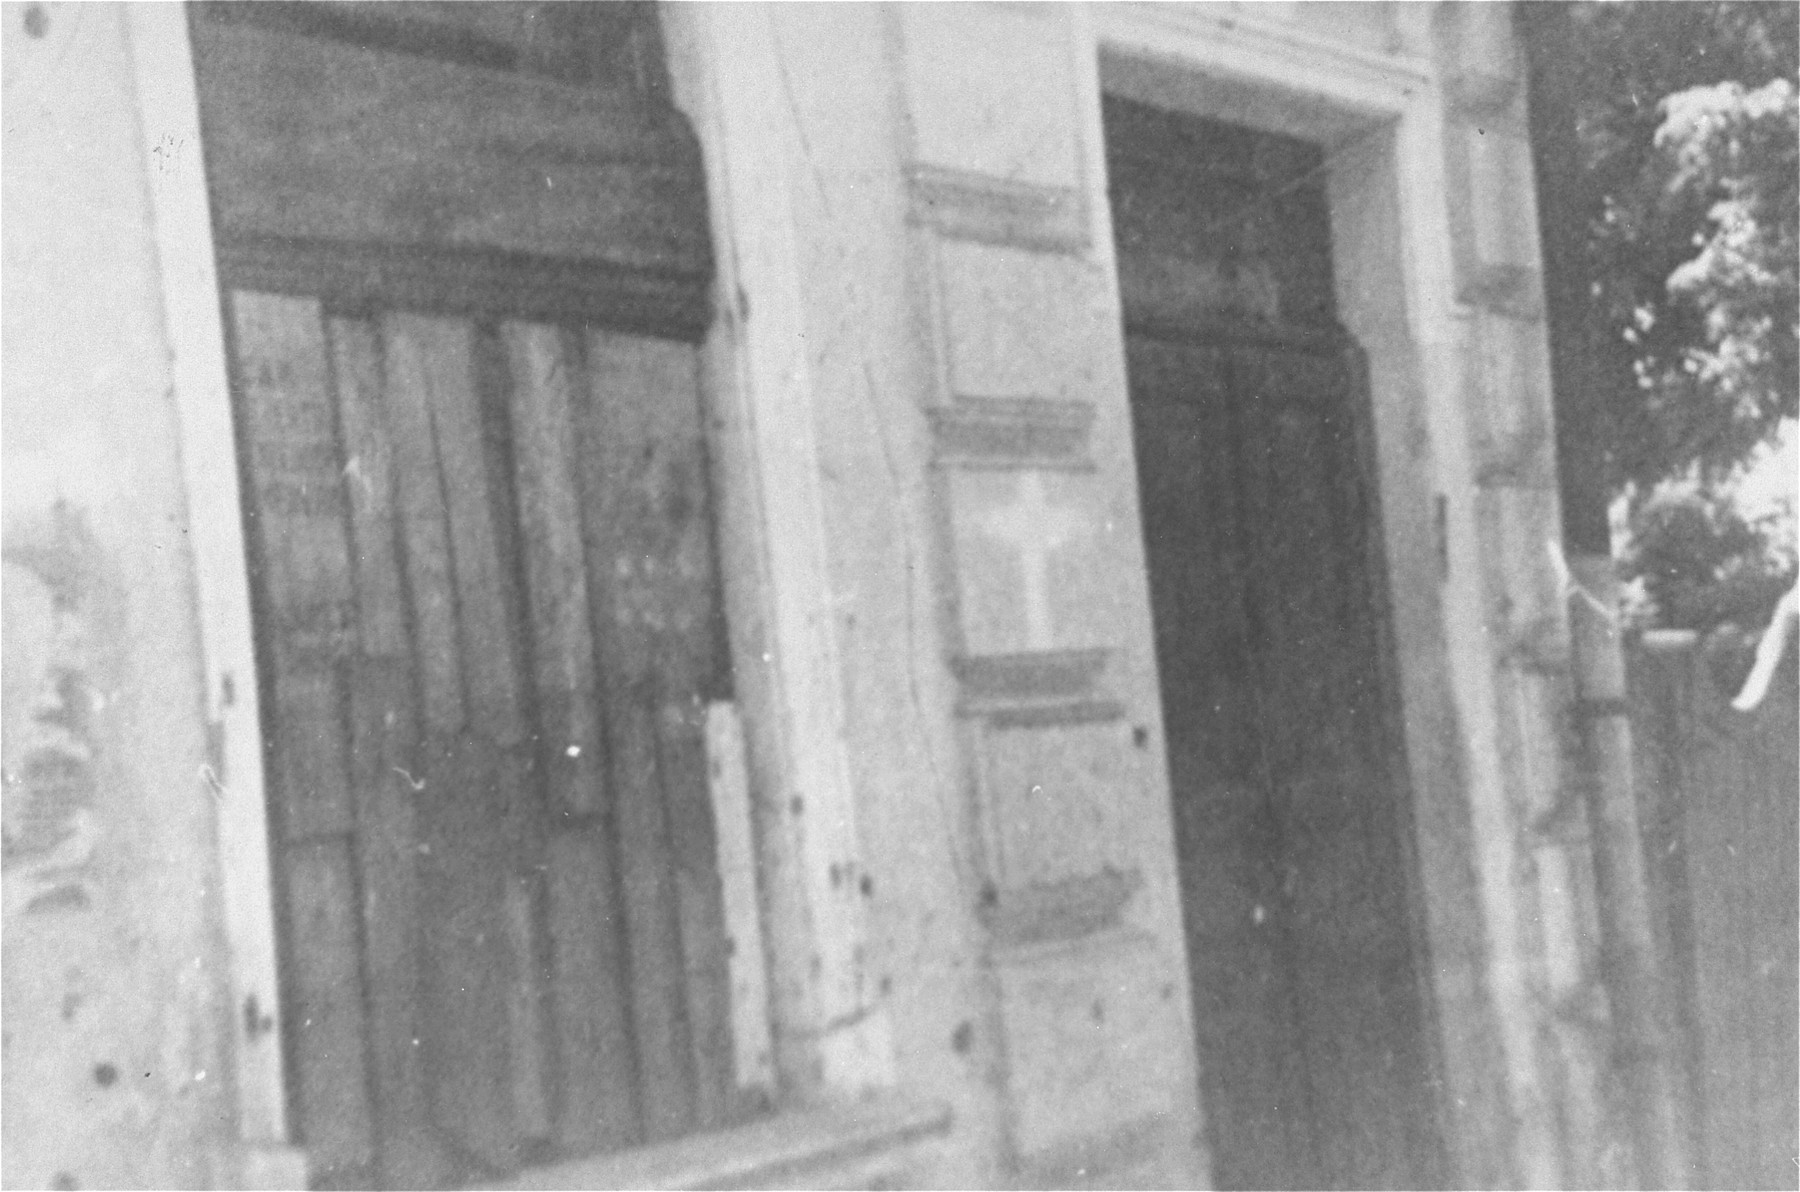 A house marked by a cross, indicating that no Jews lived there.  

On June 25, Iasi policemen [invited] the Christian population to place crosses on their windows and doors. This cross served as a means to differentiate the Christian houses from the house of the intended victims.